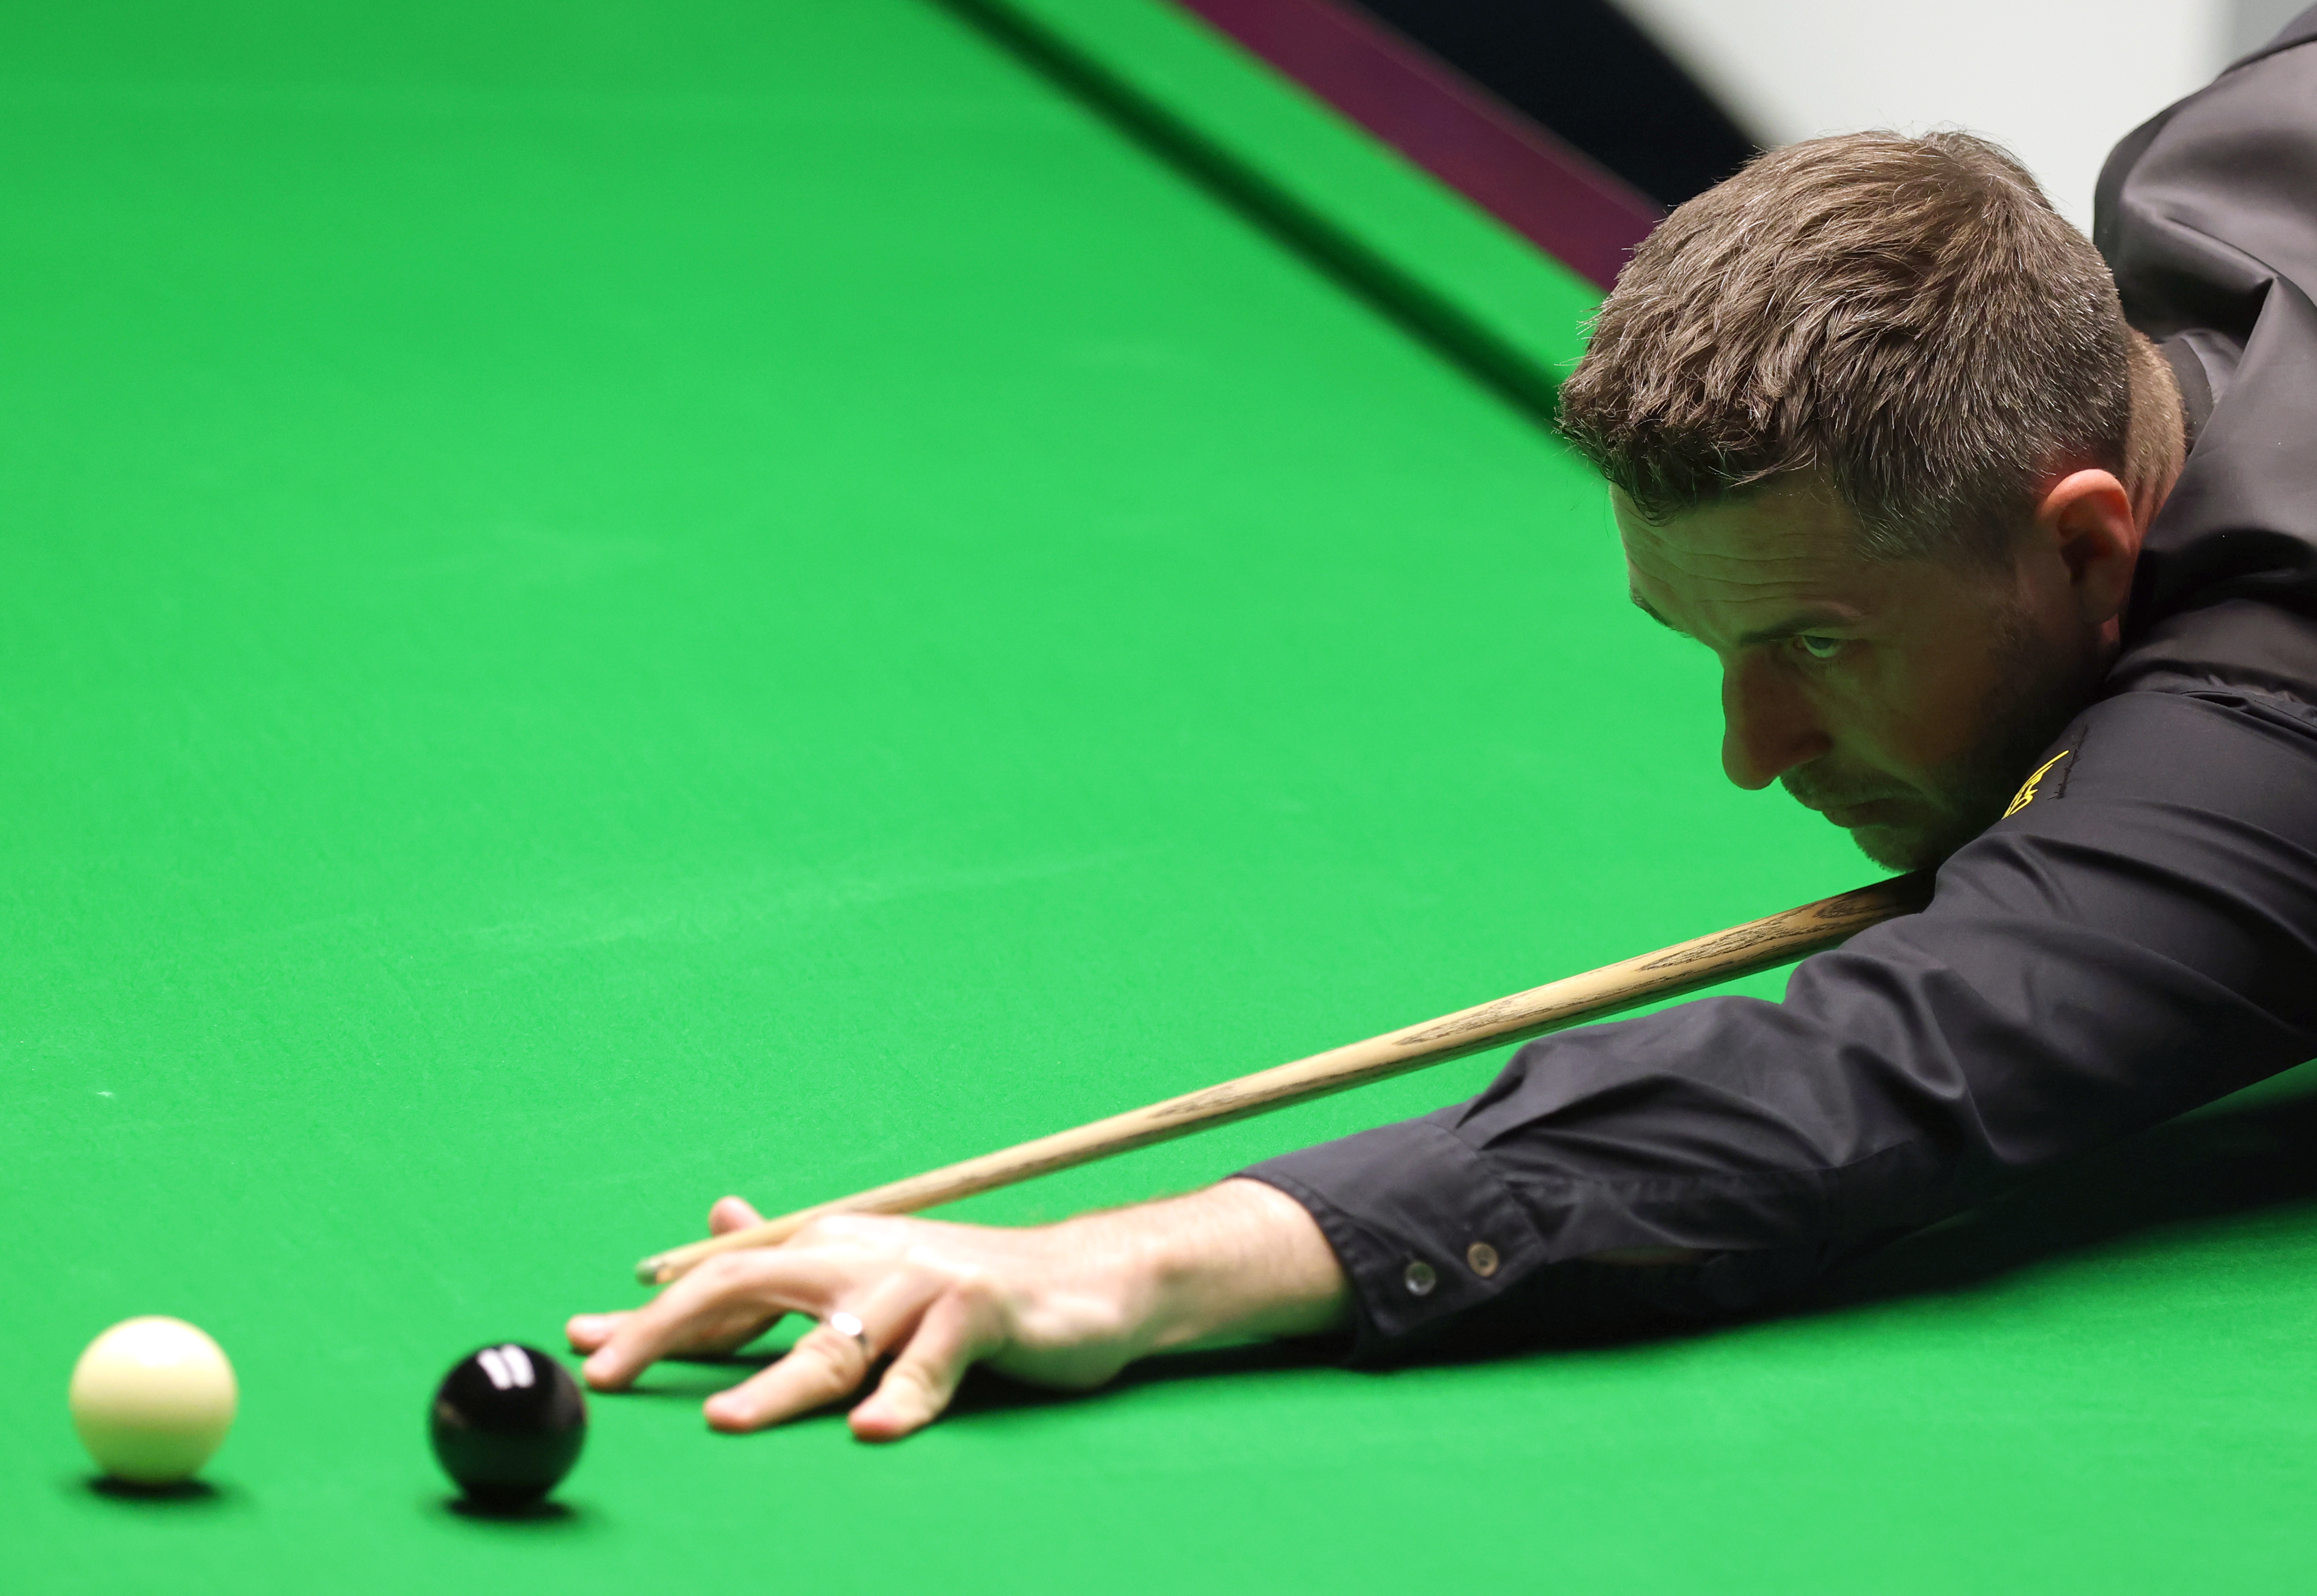 Snooker results Mark Selby and Si Jiahui reach Crucible quarter-finals